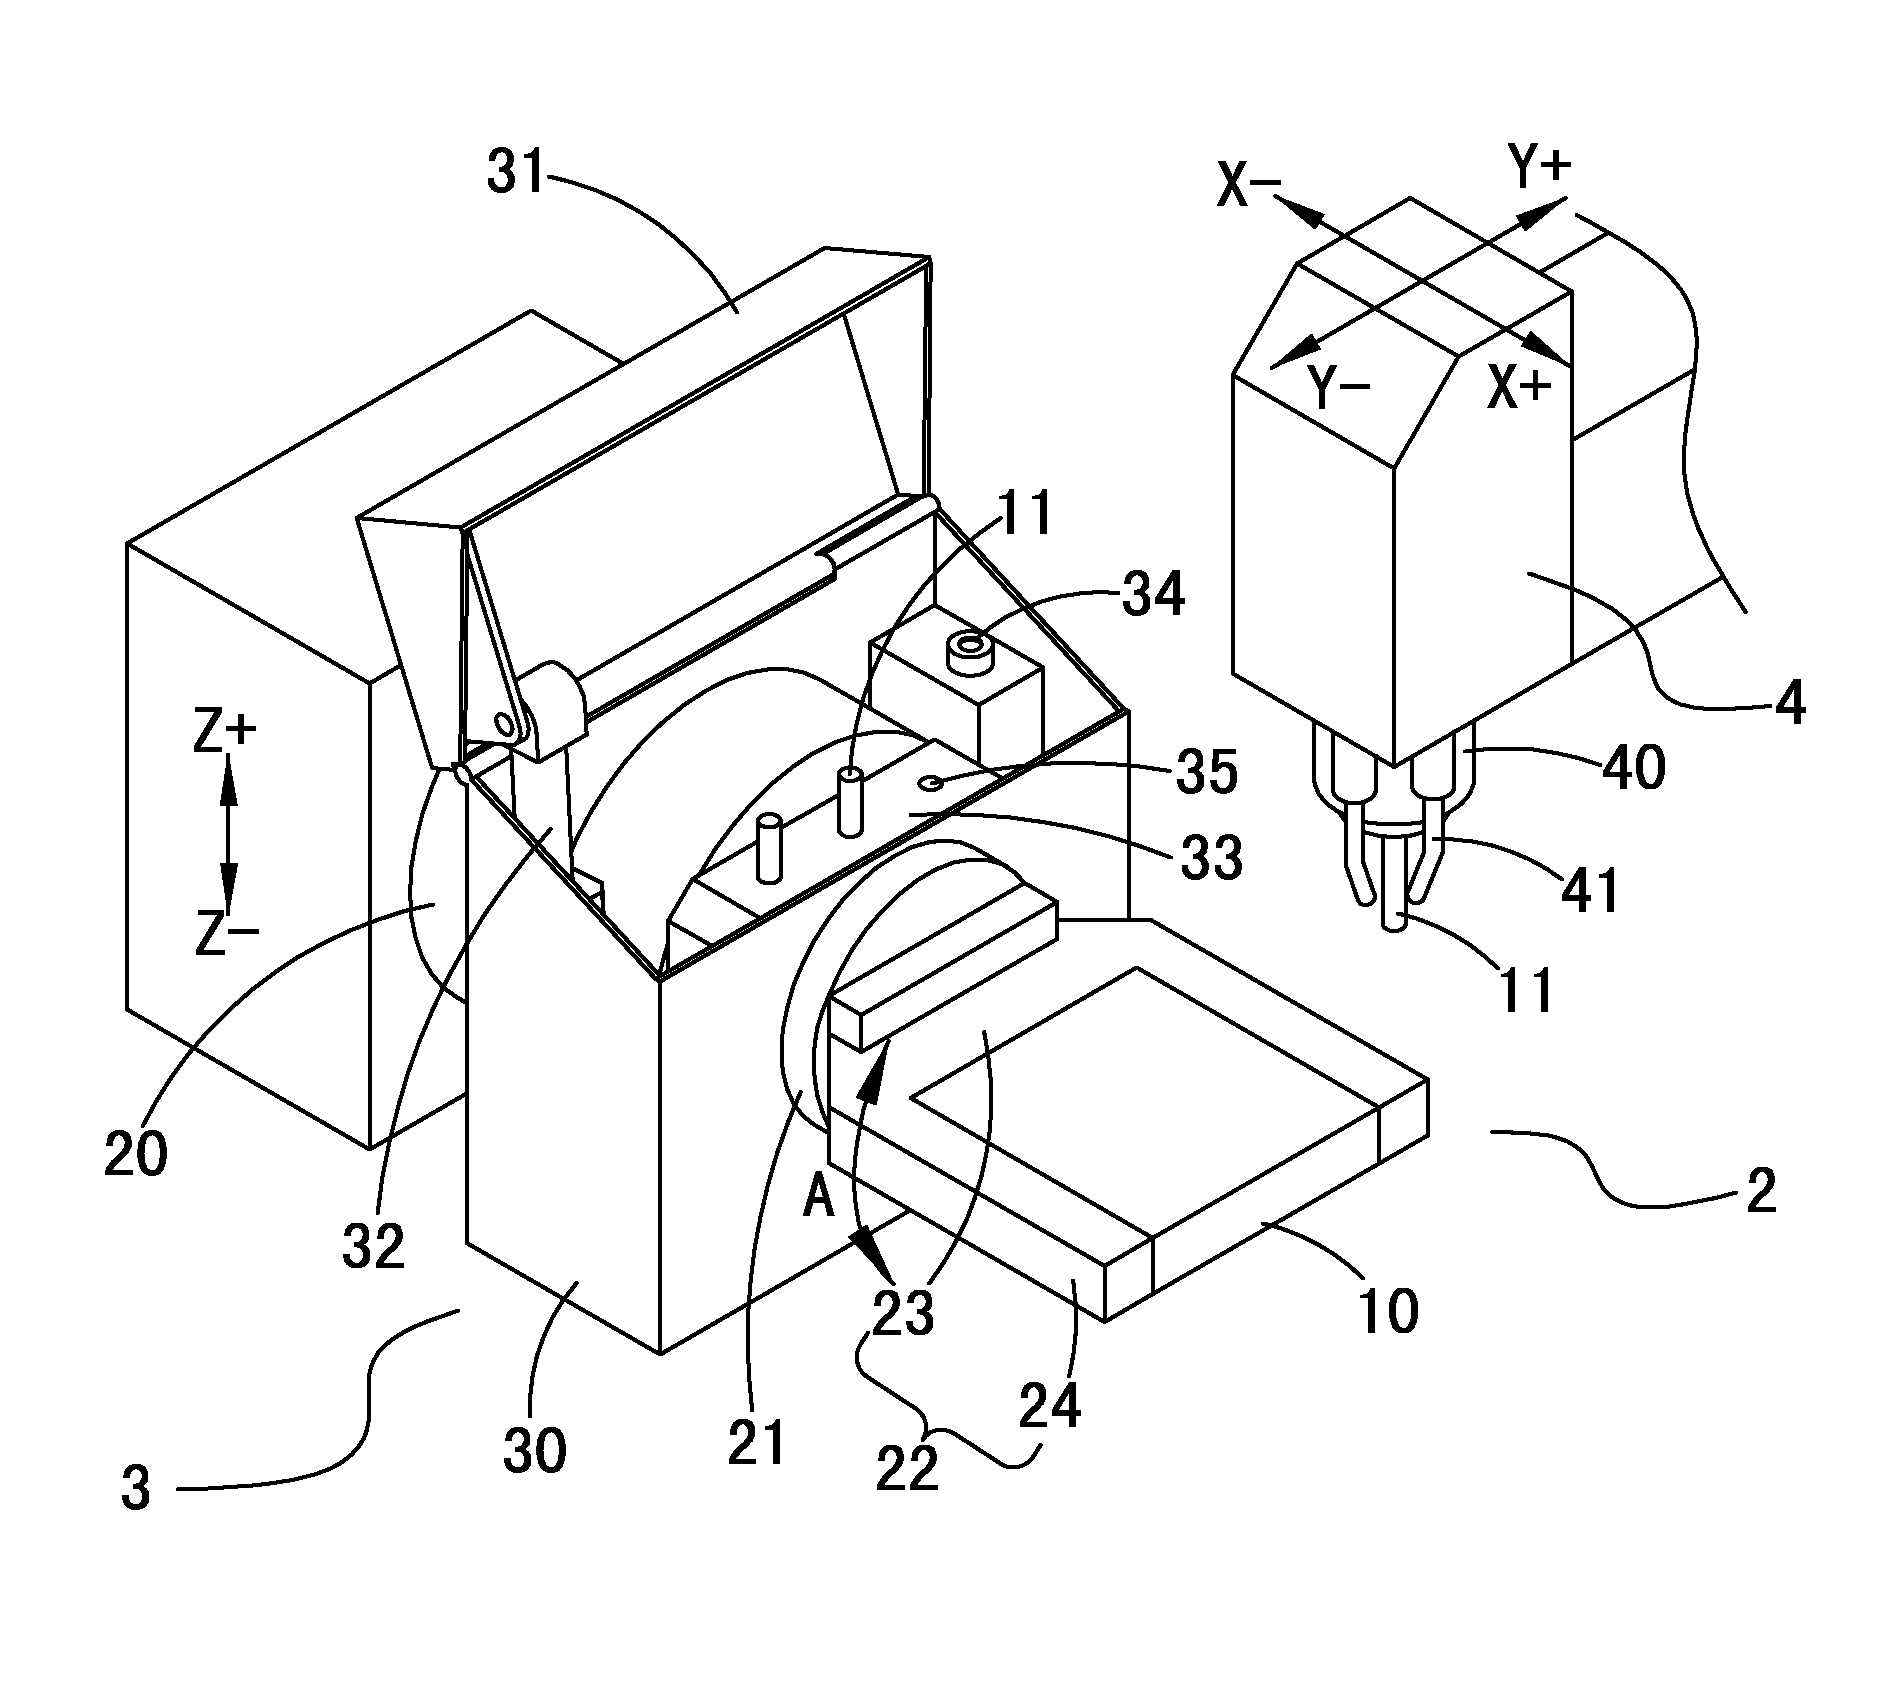 Multi-spindle machining machine with tool changing mechanism